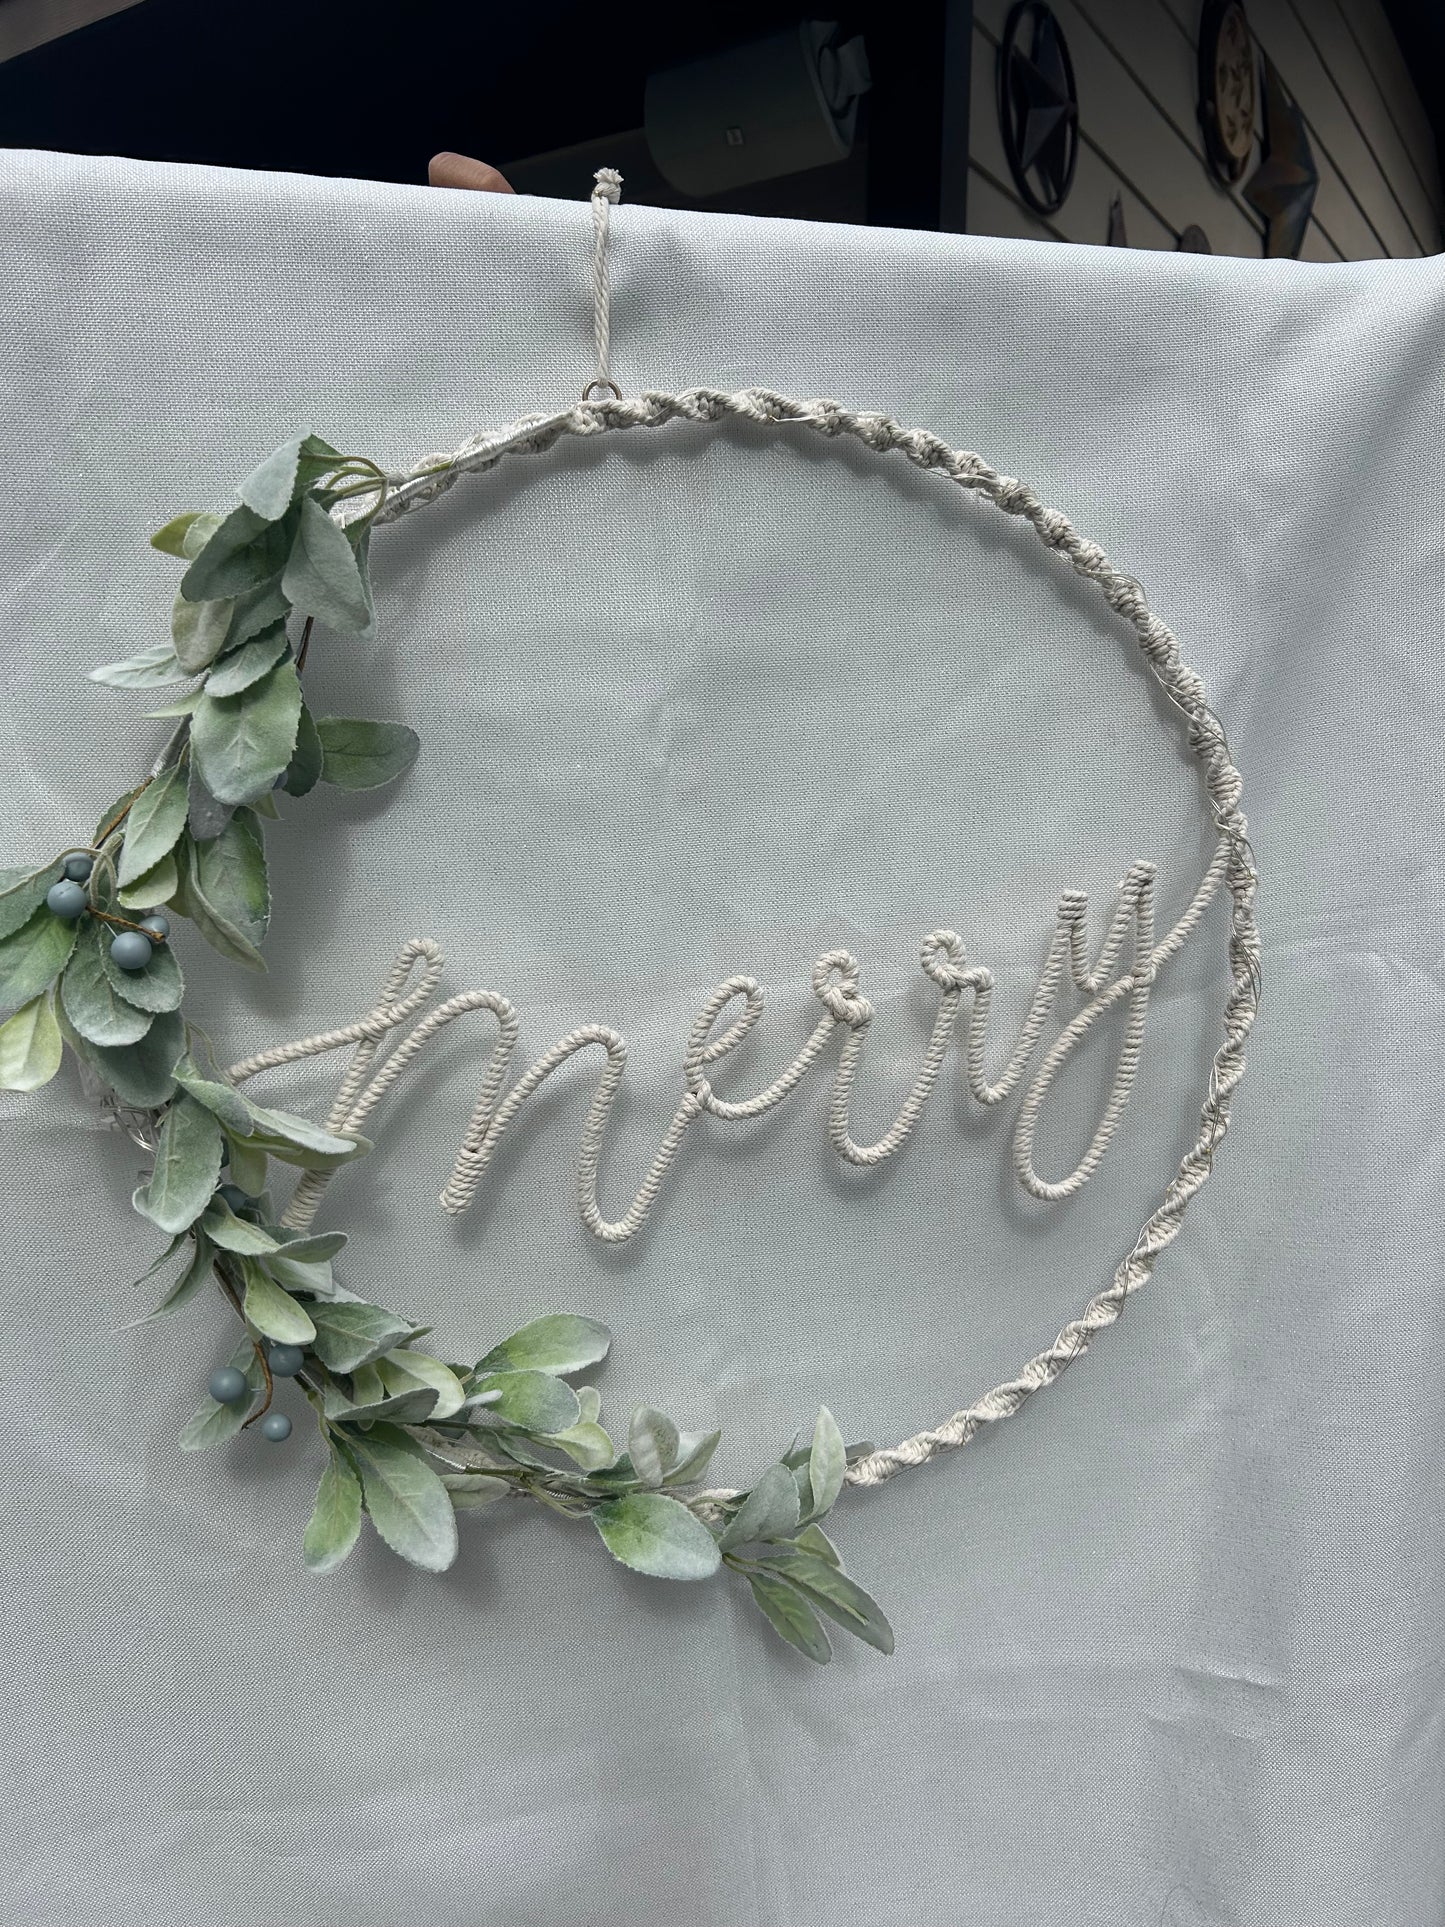 beautiful “merry” wreath with lights